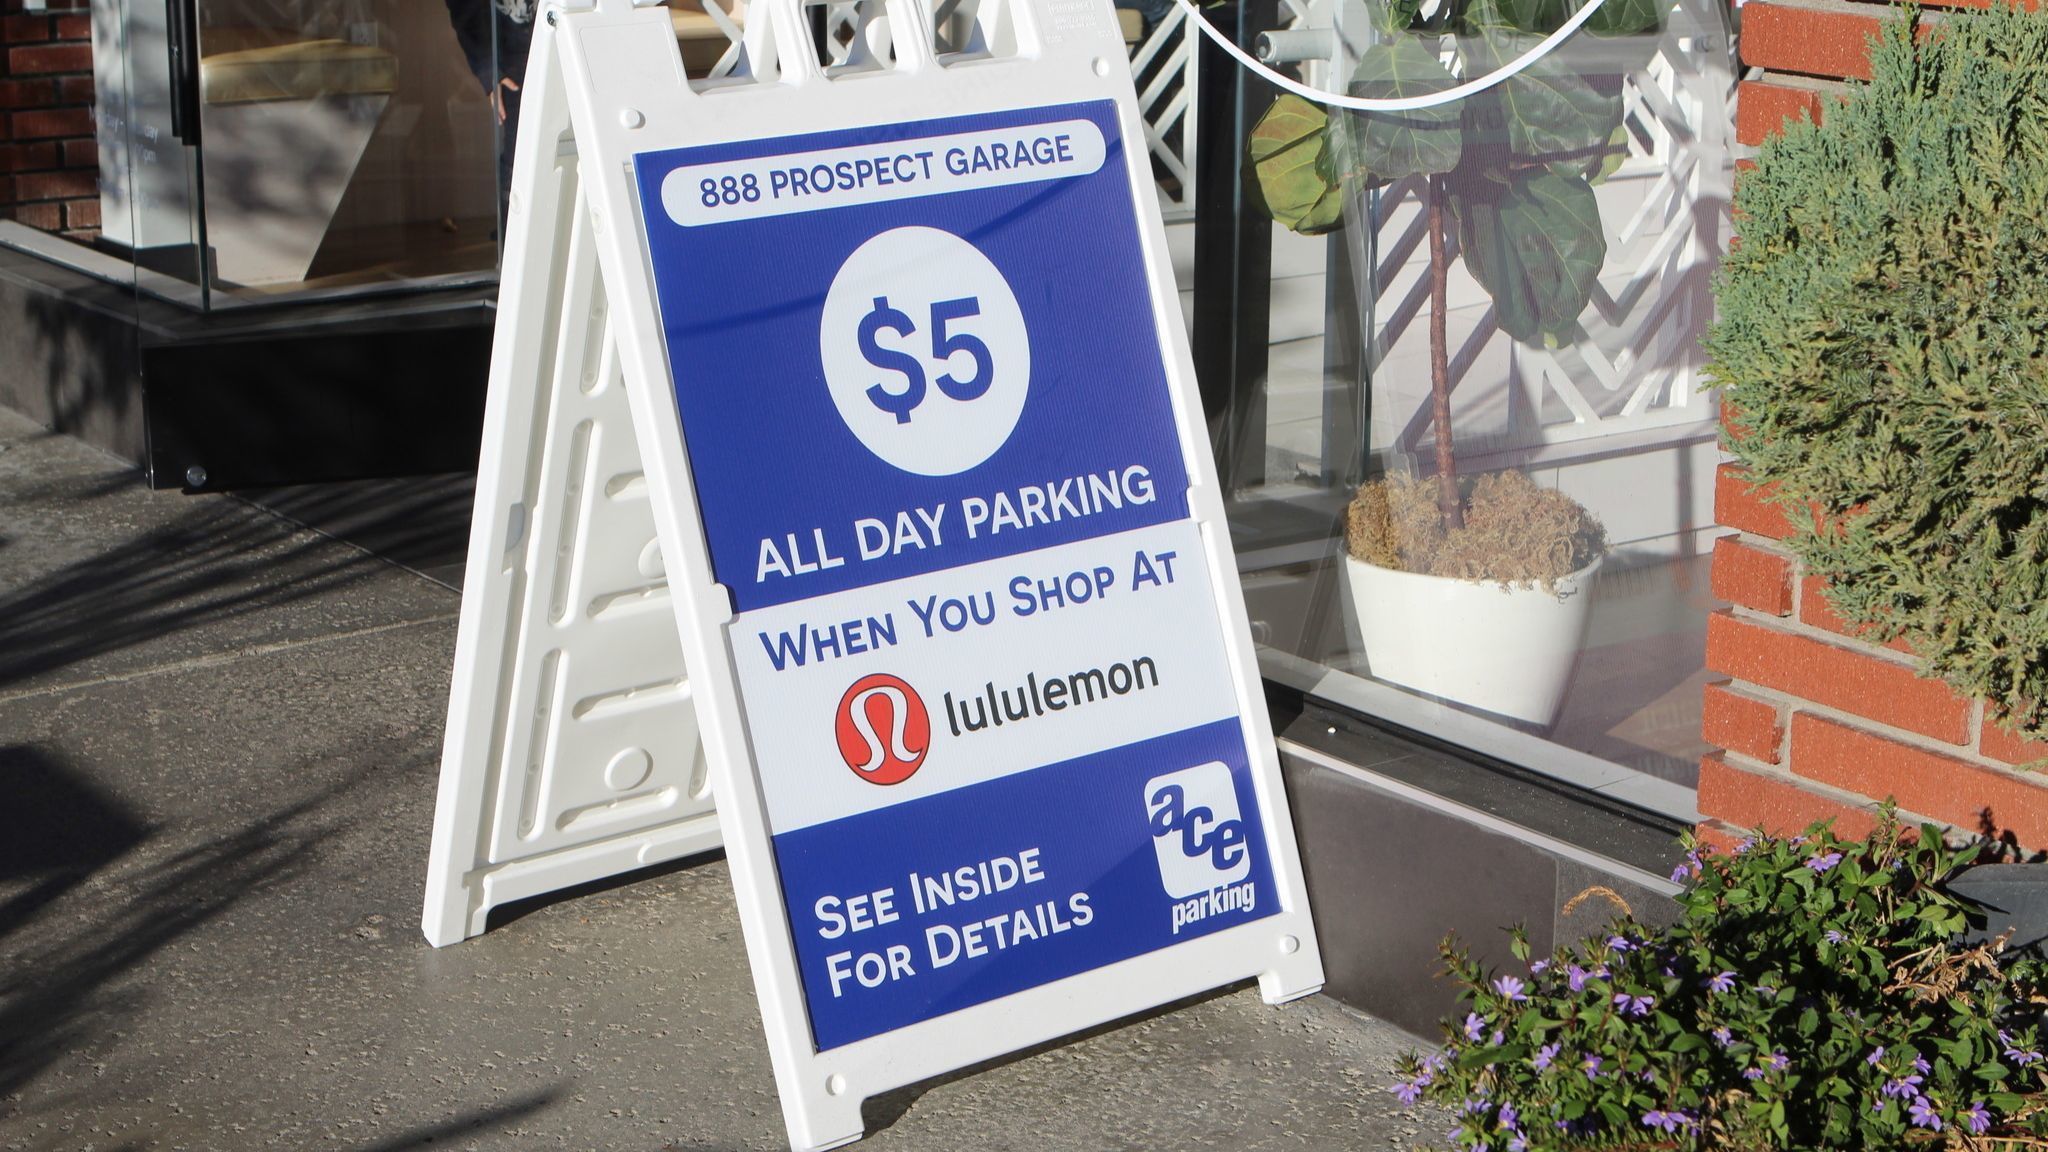 An a-frame sign advertises Ace Parking's $5 all-day parking validation program for participating La Jolla merchants.